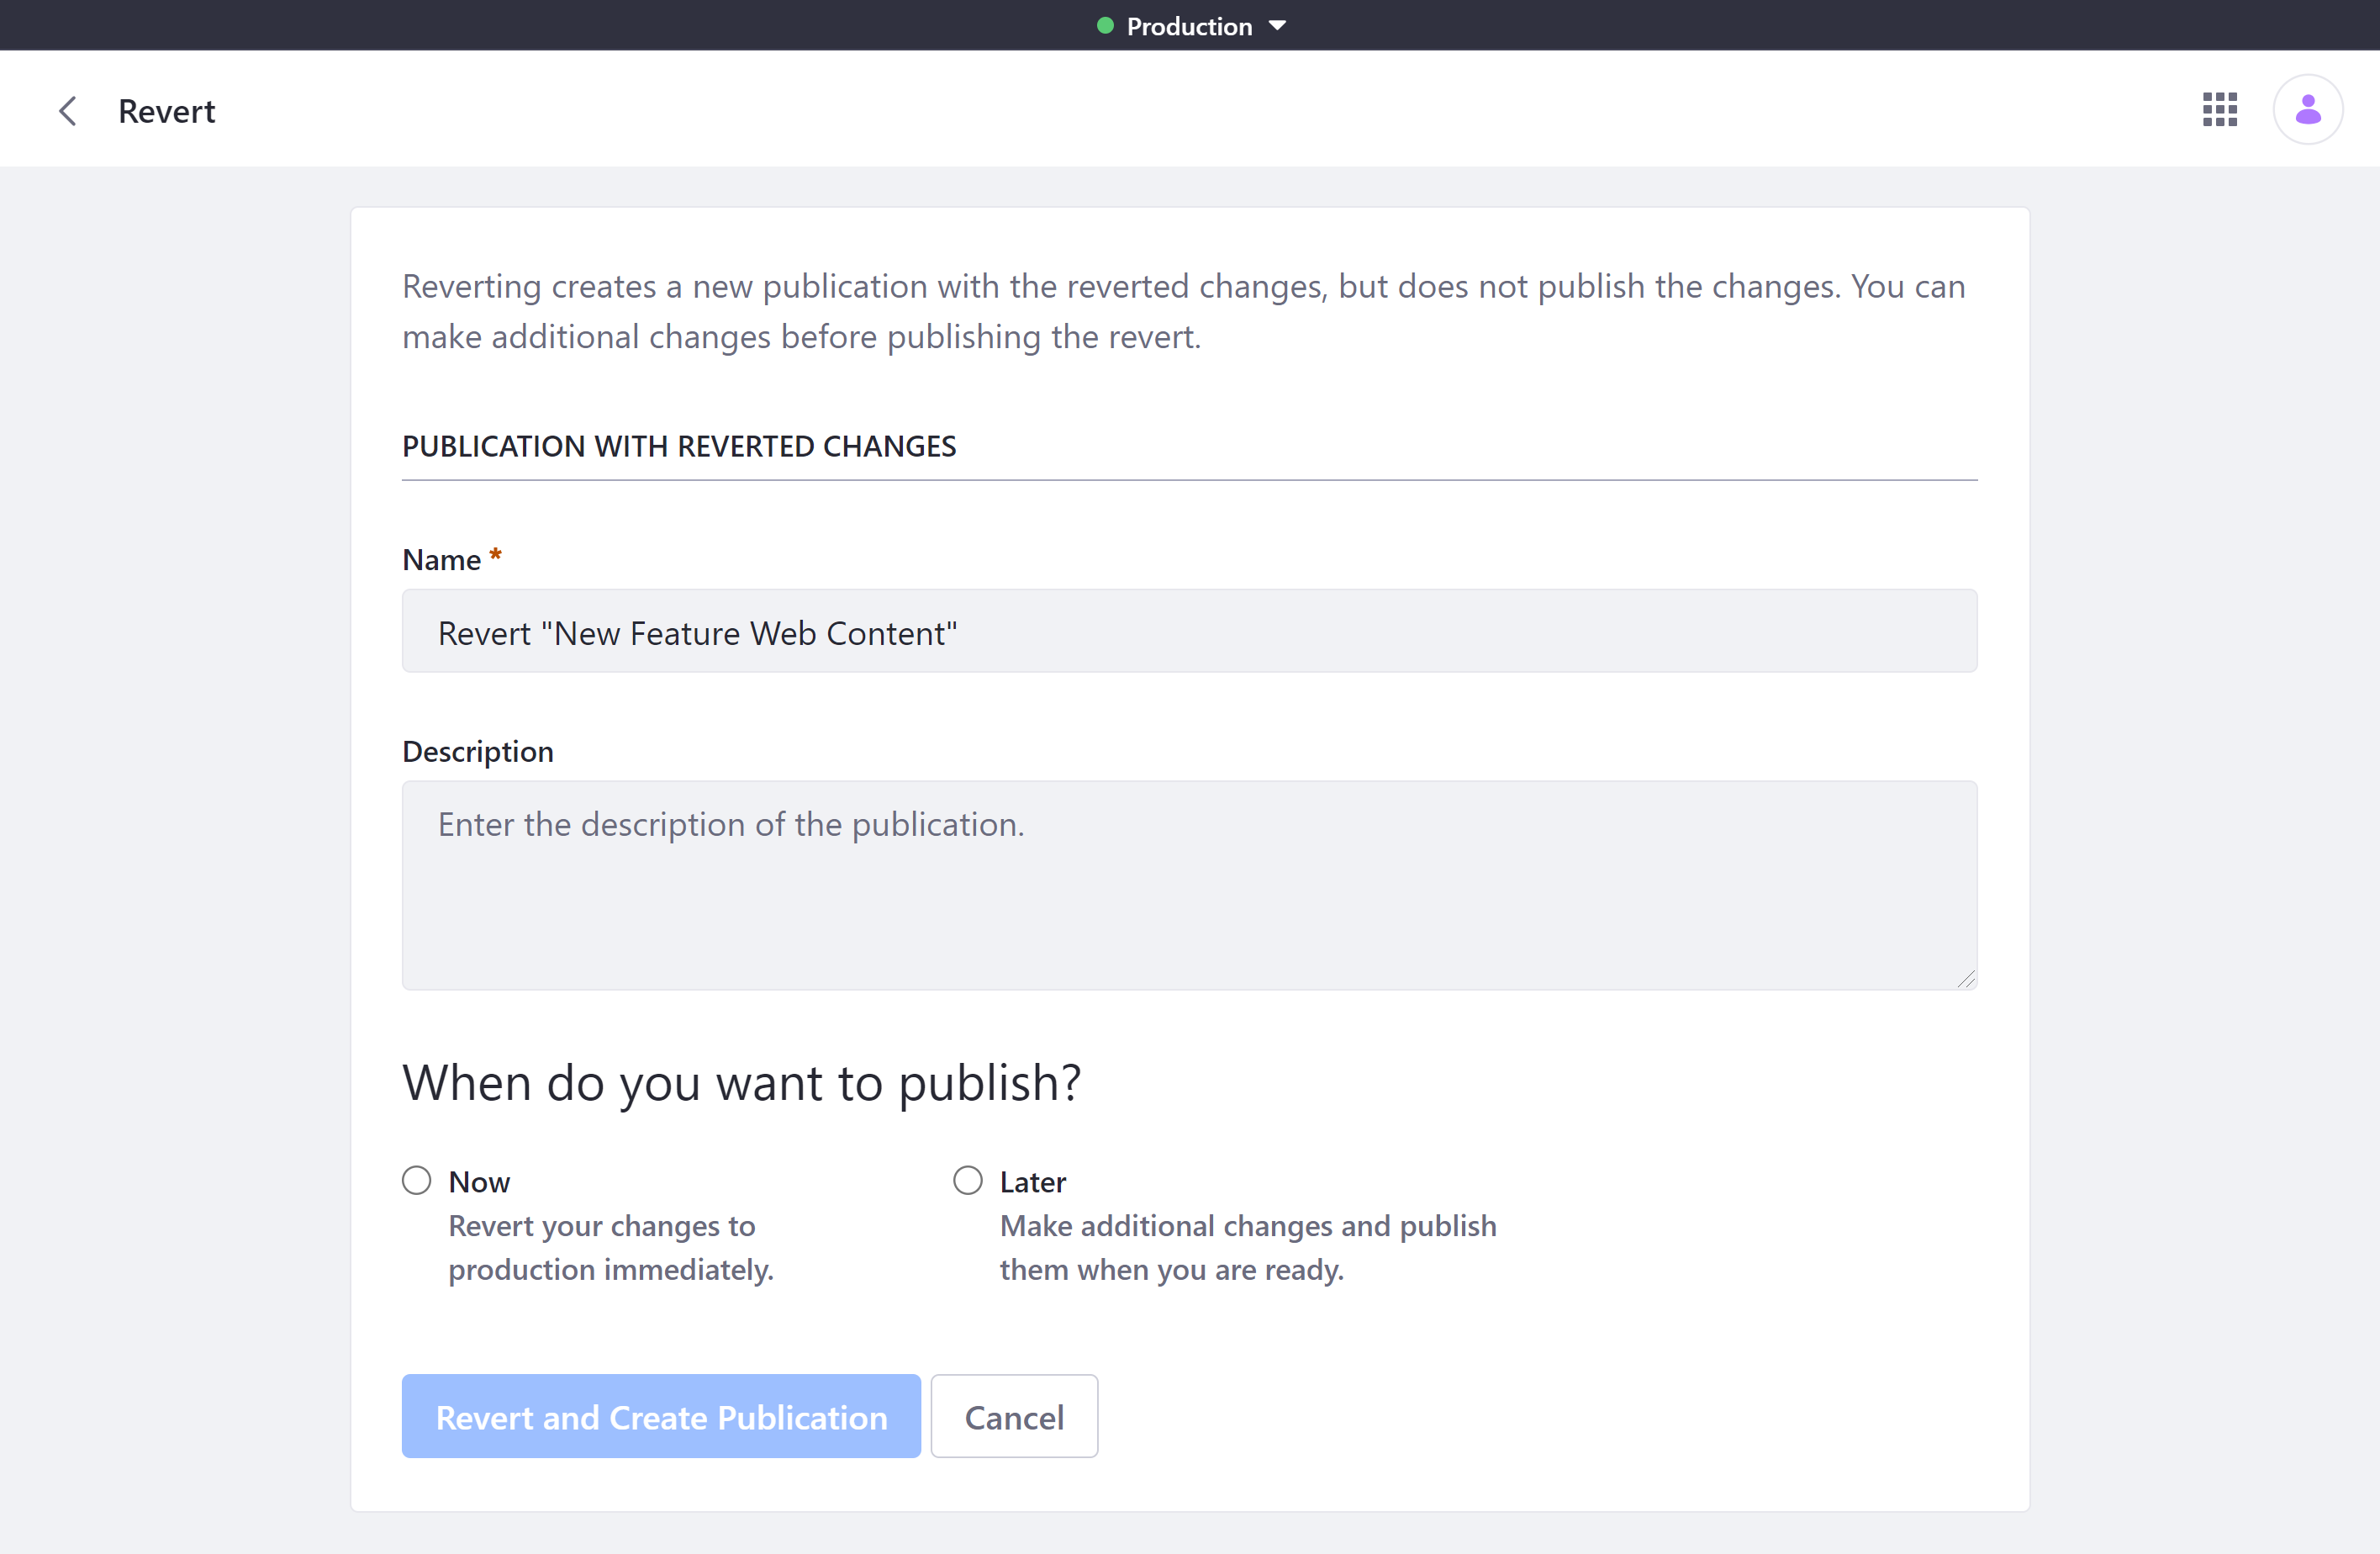 Enter a name and description for the publication, and determine when you want to publish it.